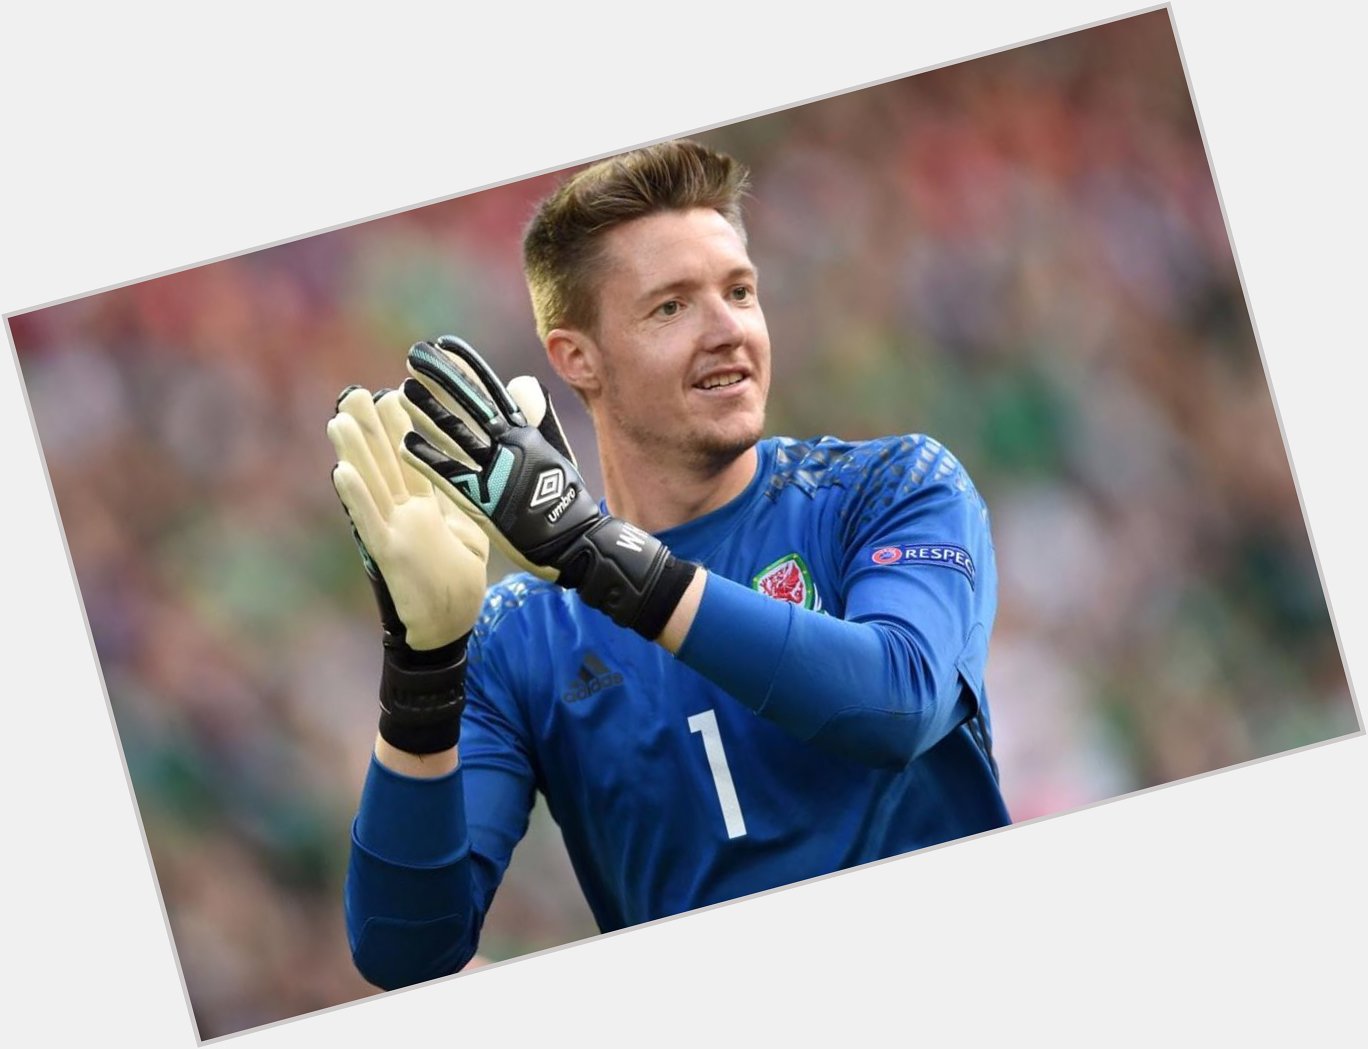 He comes from Anglesey,
He\s the one for me,
Wayne Hennessey.

Happy Birthday 